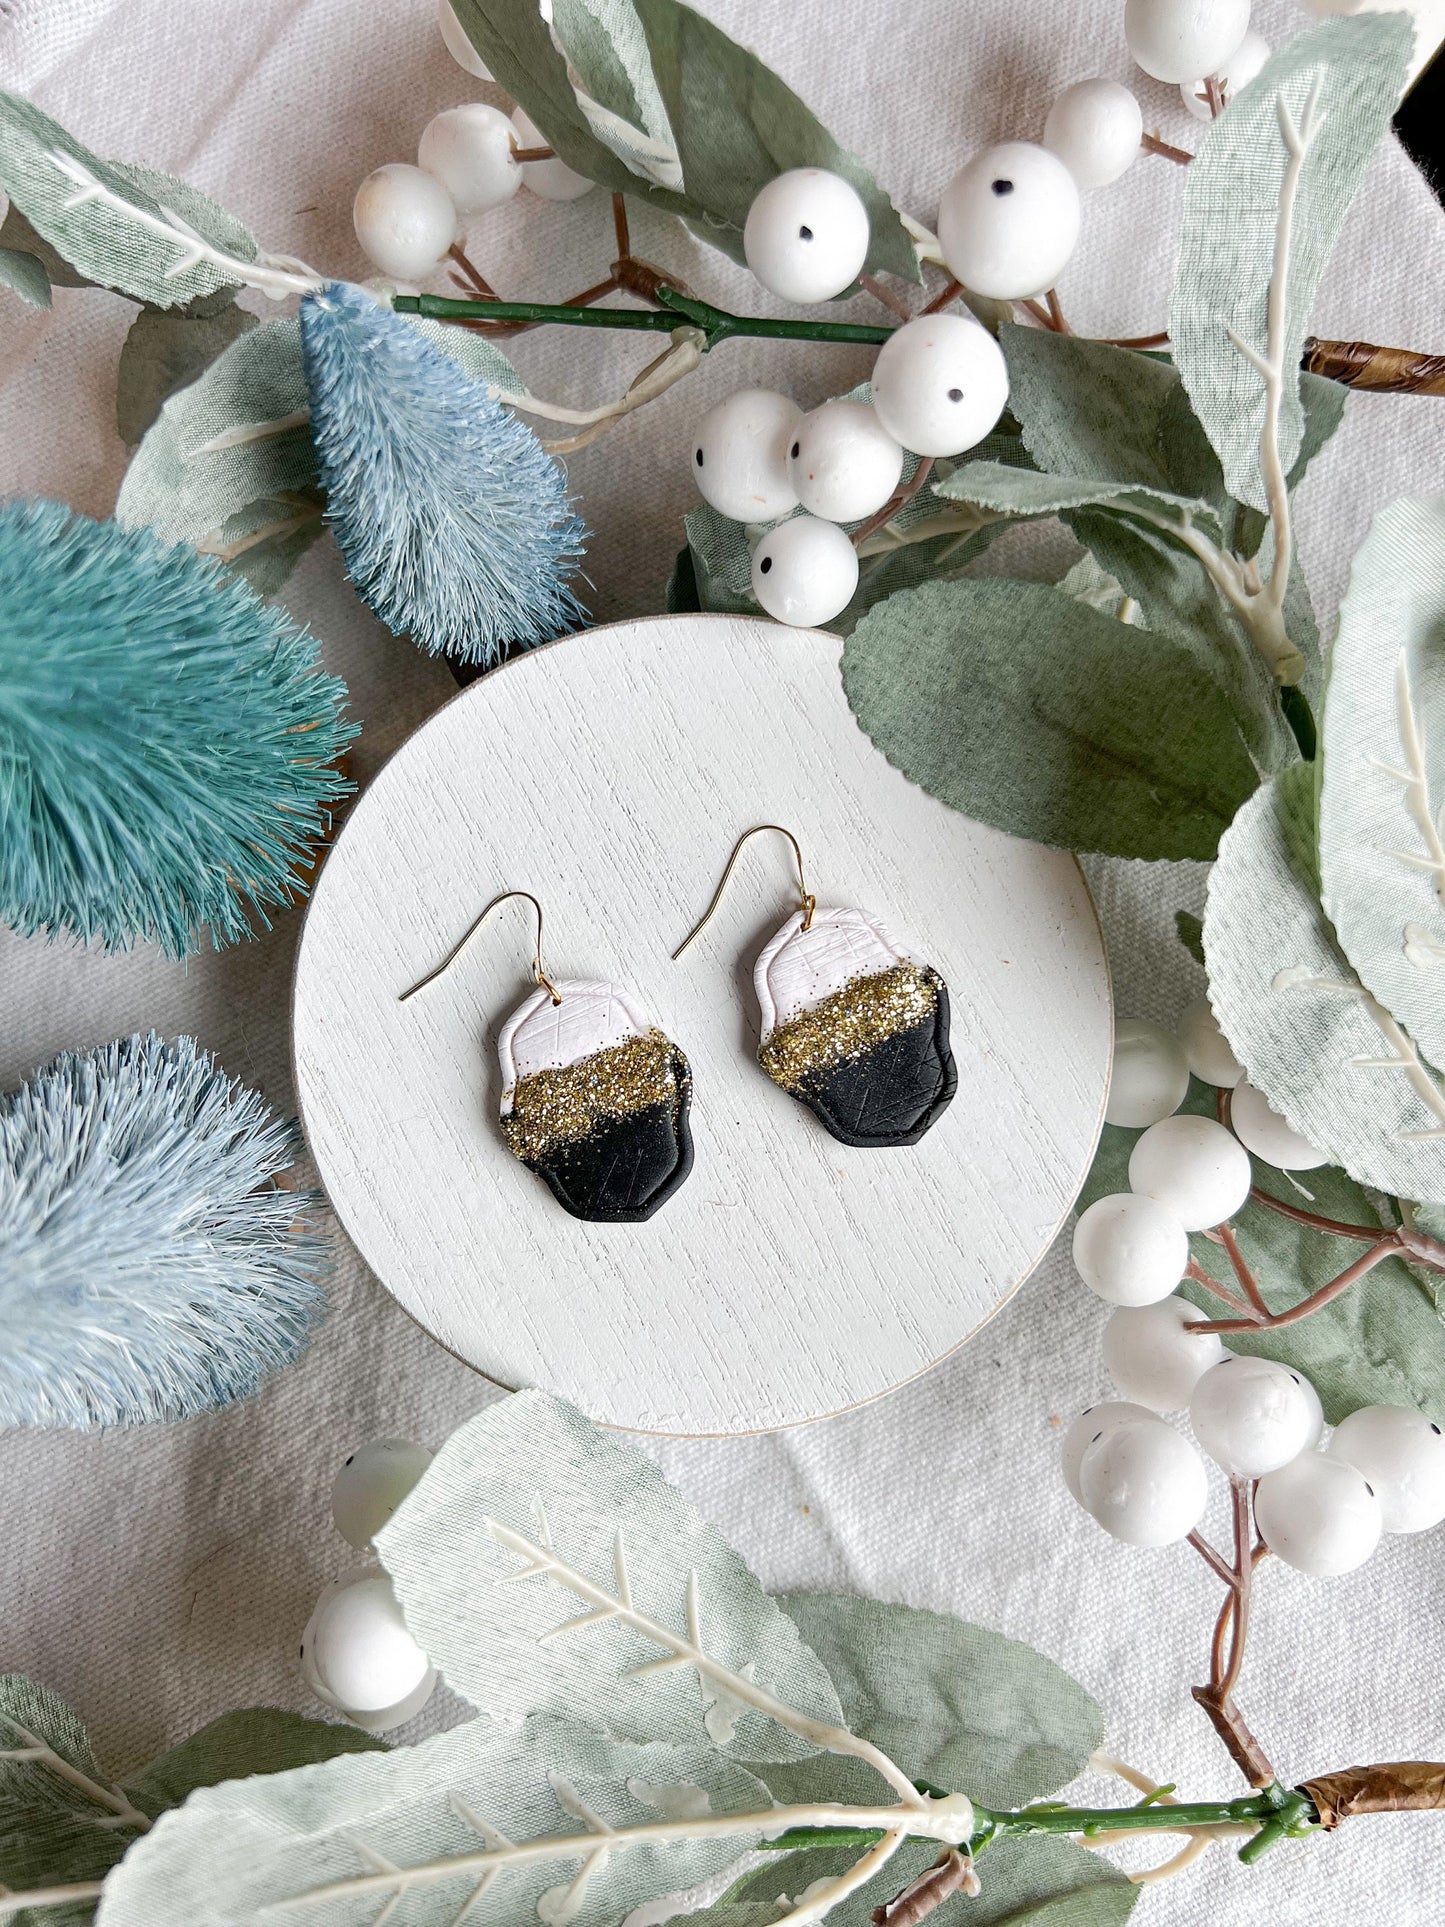 New Year's Eve Black, White and Gold Glitter Dangles